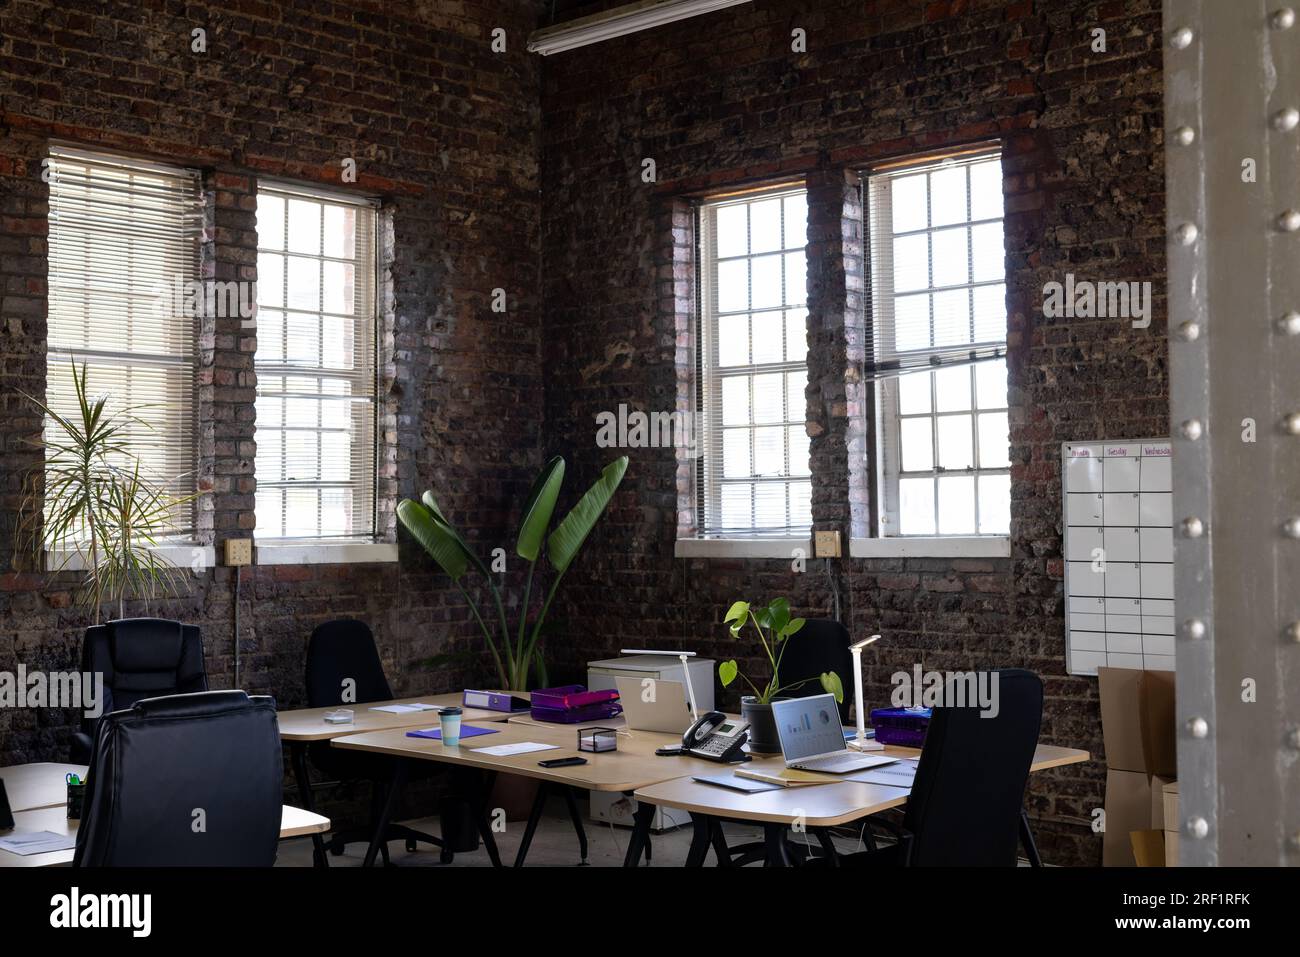 Modern casual office interior with exposed brick walls, desks and chairs Stock Photo